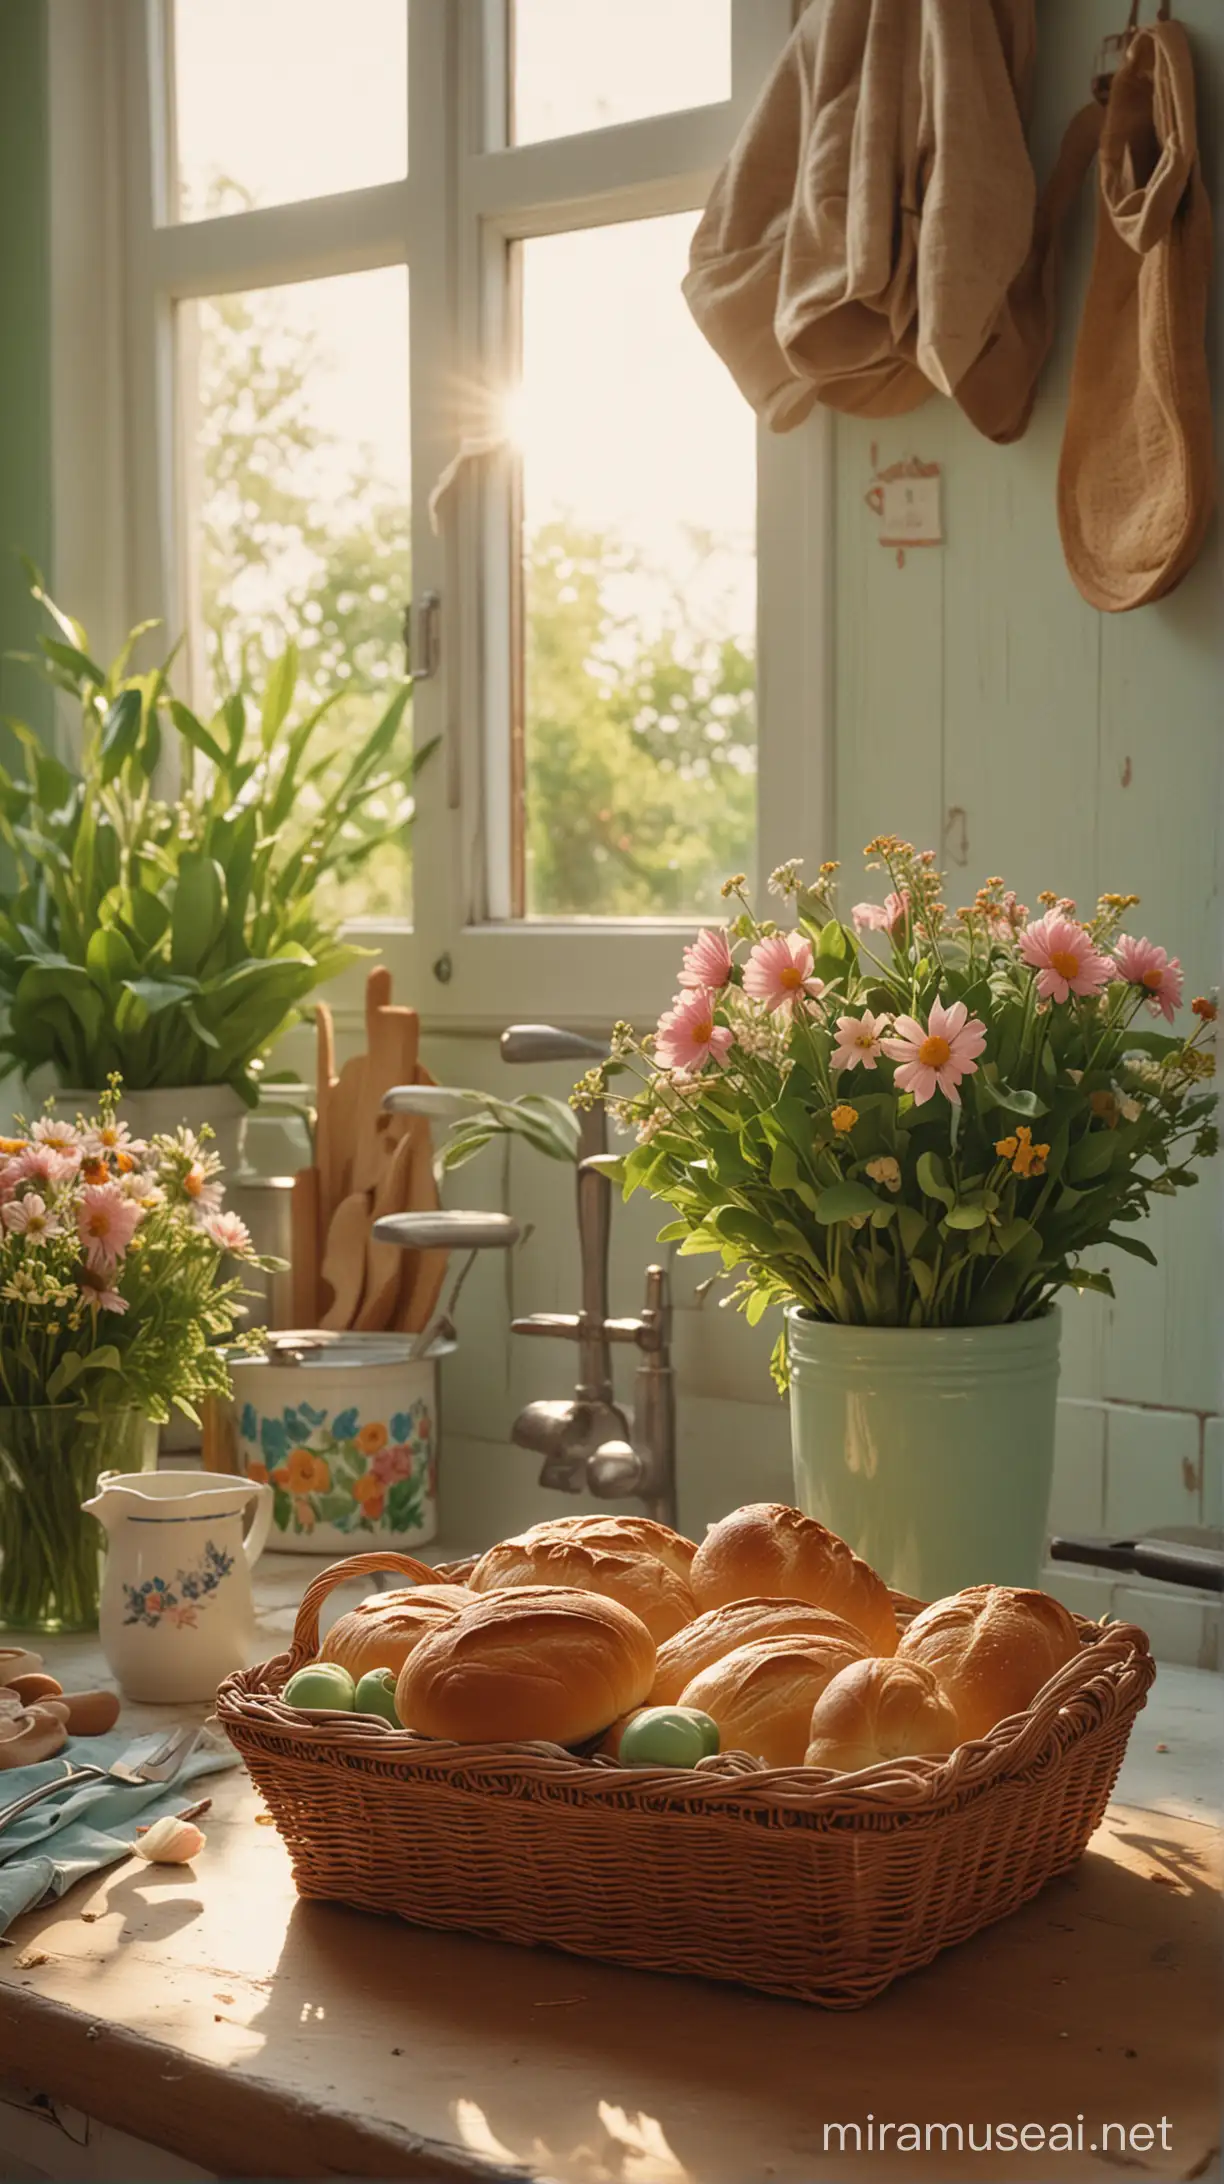 french kitchen. green retro. filled with flowers. cute. bread in basket, in the style of laura makabresku, pastel tone color palette, gustave courbet, miwa komatsu, colorful animation stills, soft, muted palette, intricate floral arrangements, in the style of naturalistic poses, vacation dadcore, youthful energy, a coolexpression, analog film, super detail, dreamy lofi photography, colorful,  shot on fujifilm XT4, sunset, backlit, photography, expansive, awe-inspiring, breathtaking, bright colors, sharp focus, good exposure, misty, wide-angle, sun